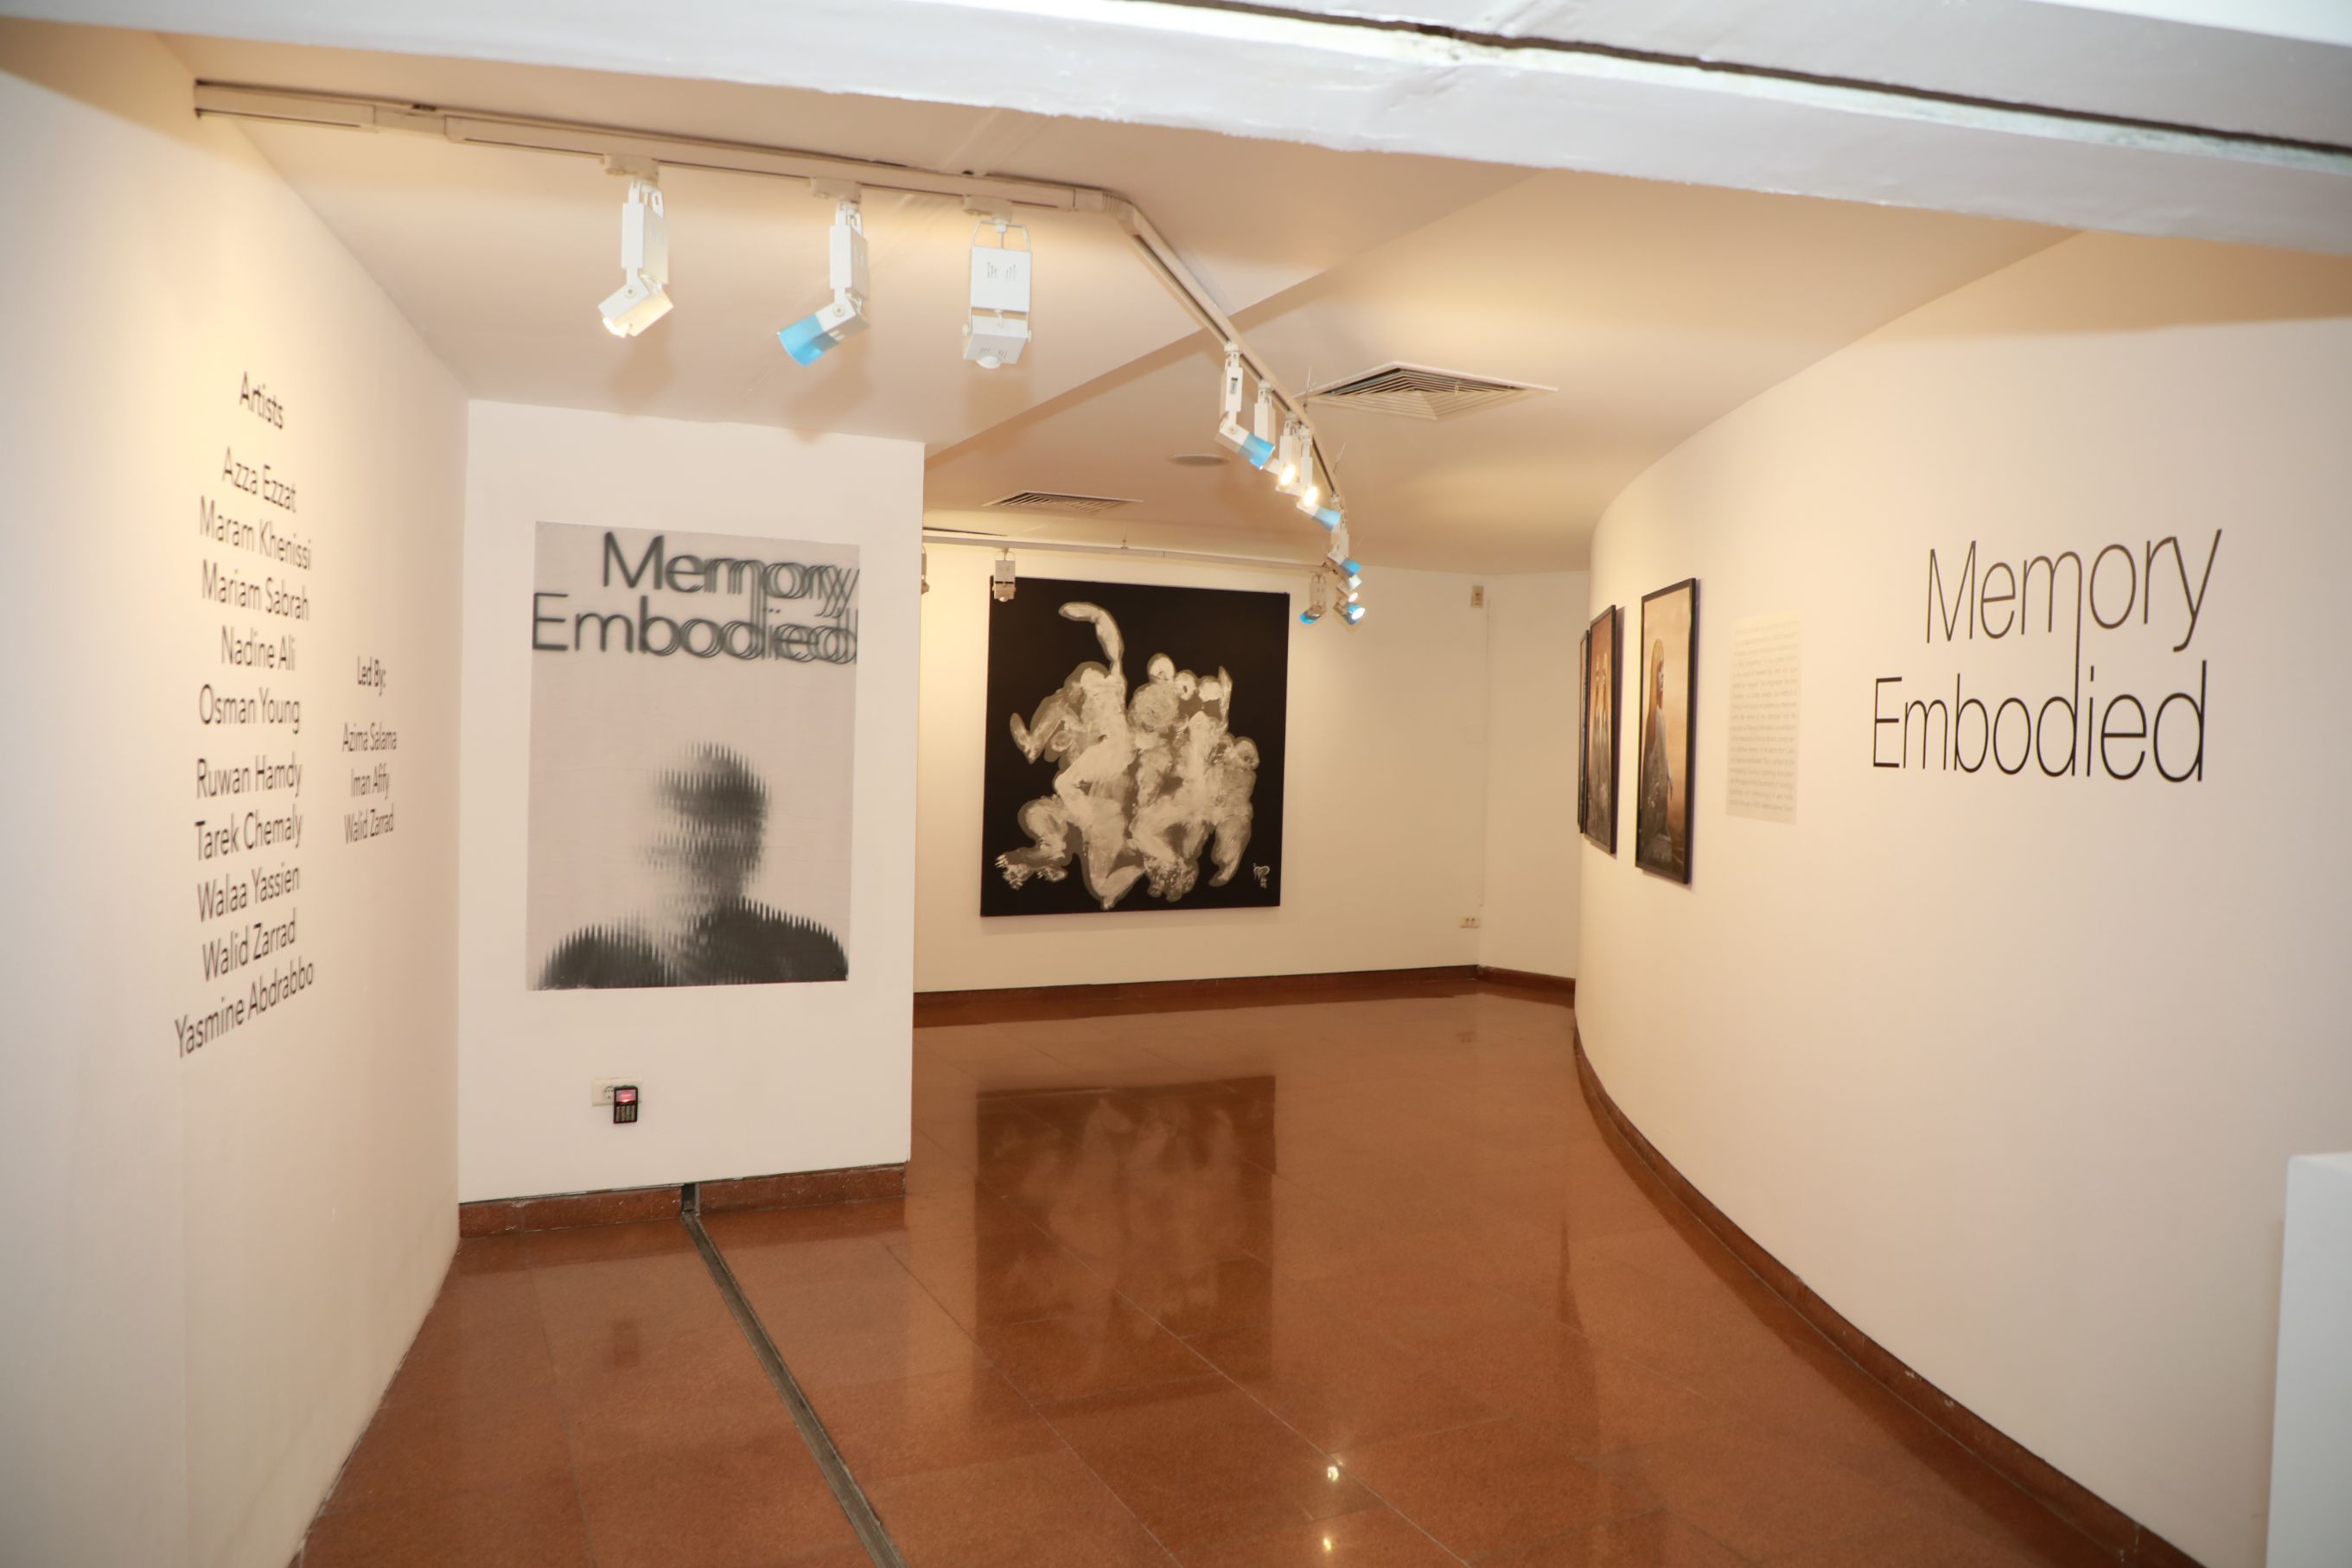 Memory Embodied: The Downtown Exhibit Reconceptualising Memory